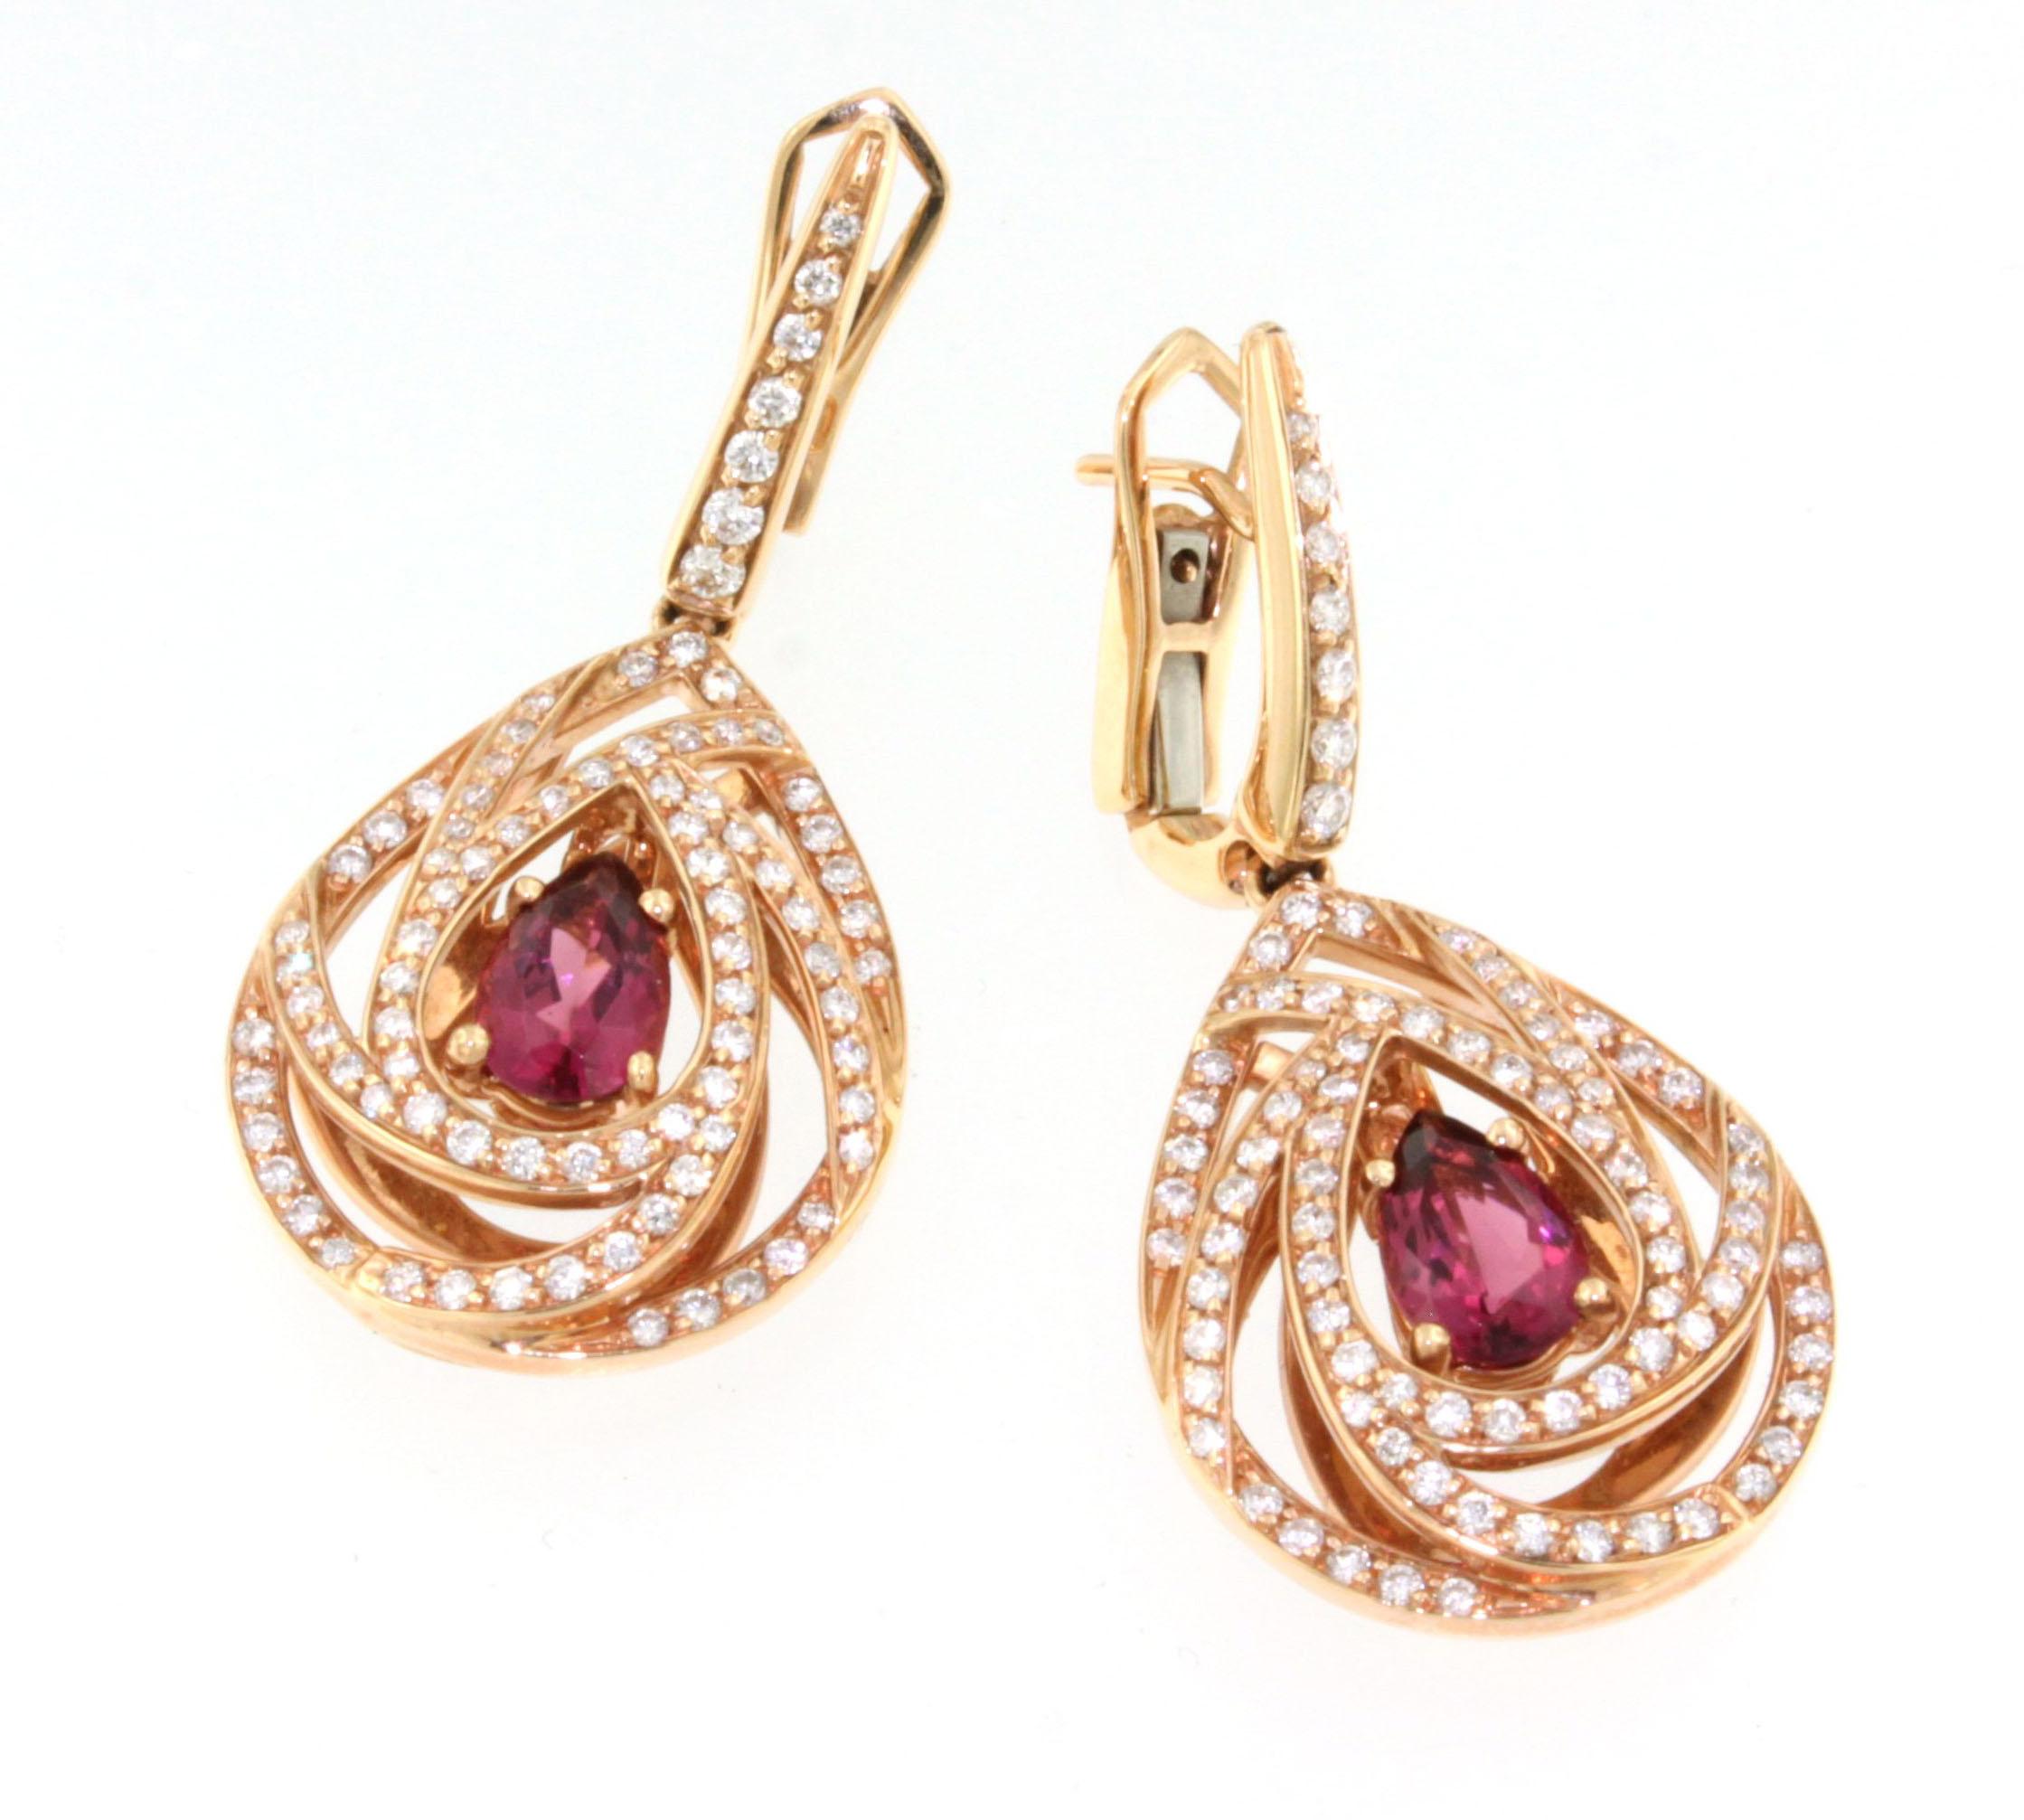 Brilliant Cut 18 Karat Rose Gold with White Diamonds and Pink Tourmaline Earrings